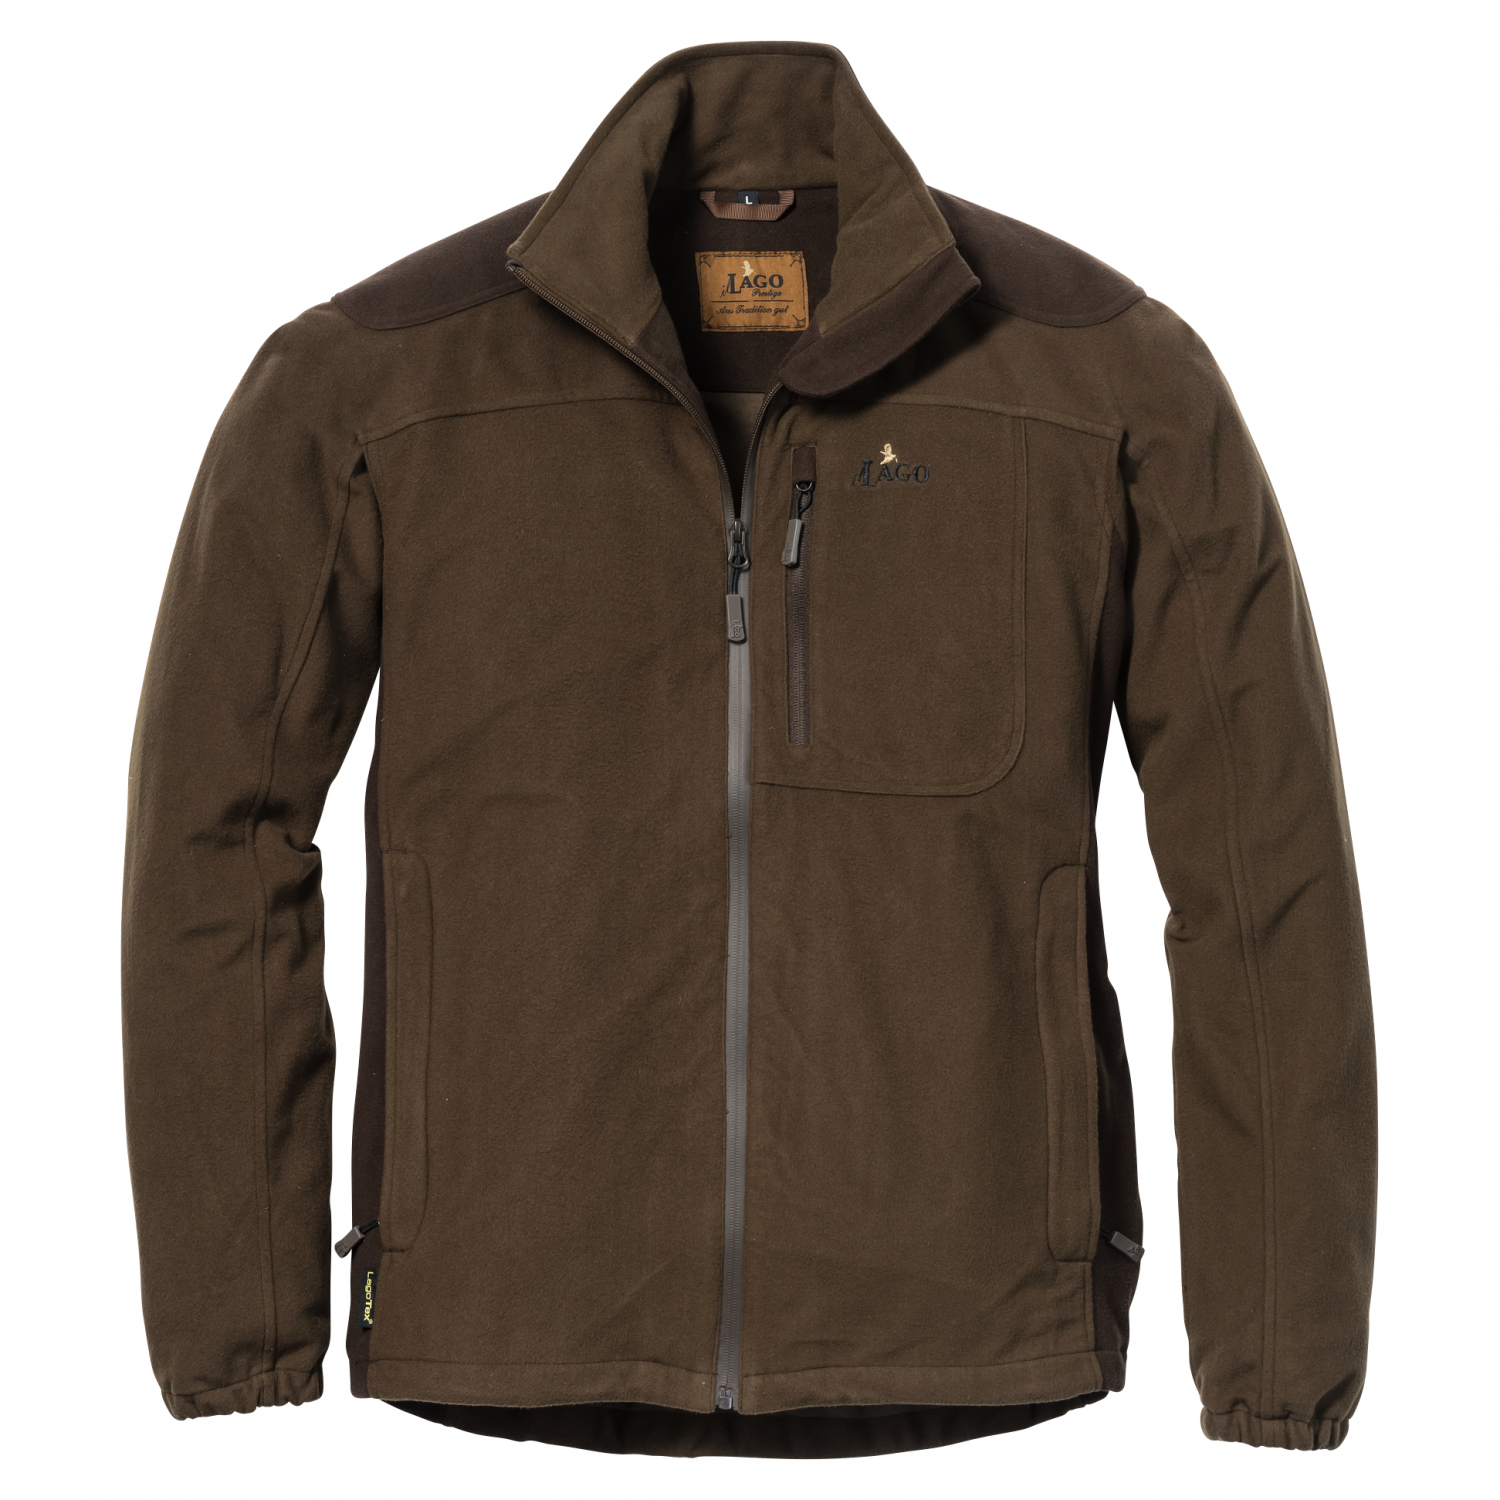 il Lago Prestige Mens Functional fleece jacket Avalanche Pro at low prices